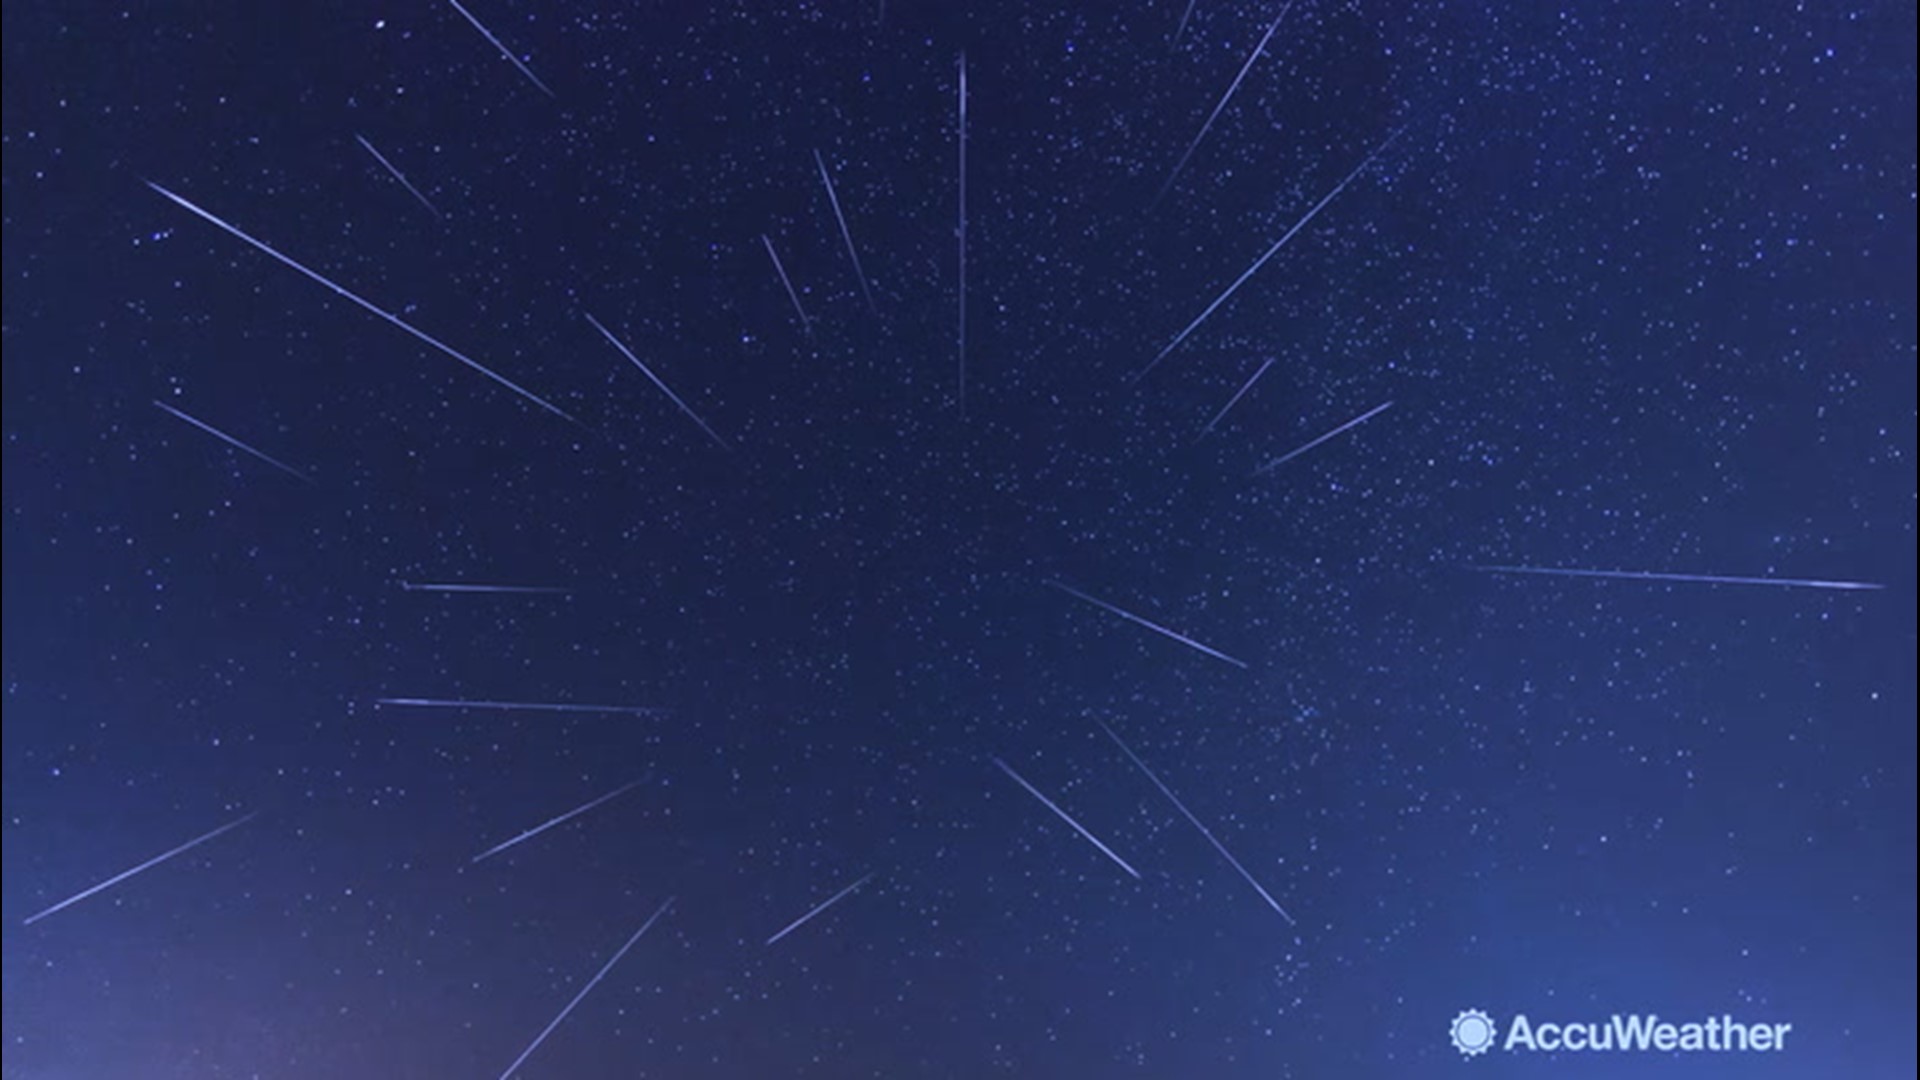 Quadrantid meteor shower to sparkle in early January sky